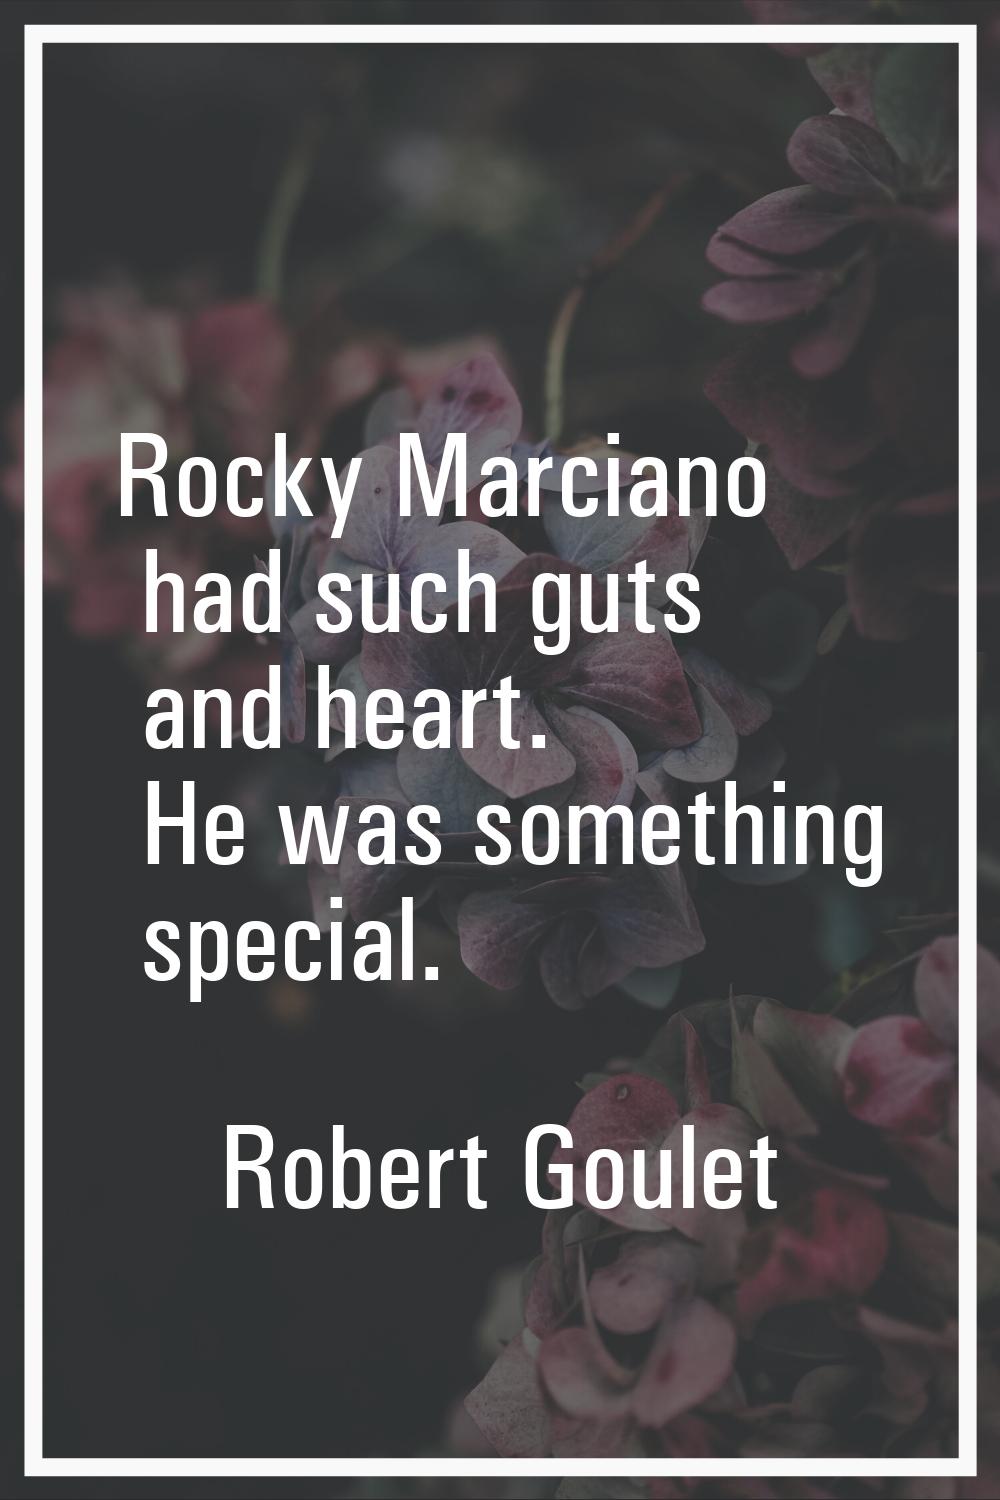 Rocky Marciano had such guts and heart. He was something special.